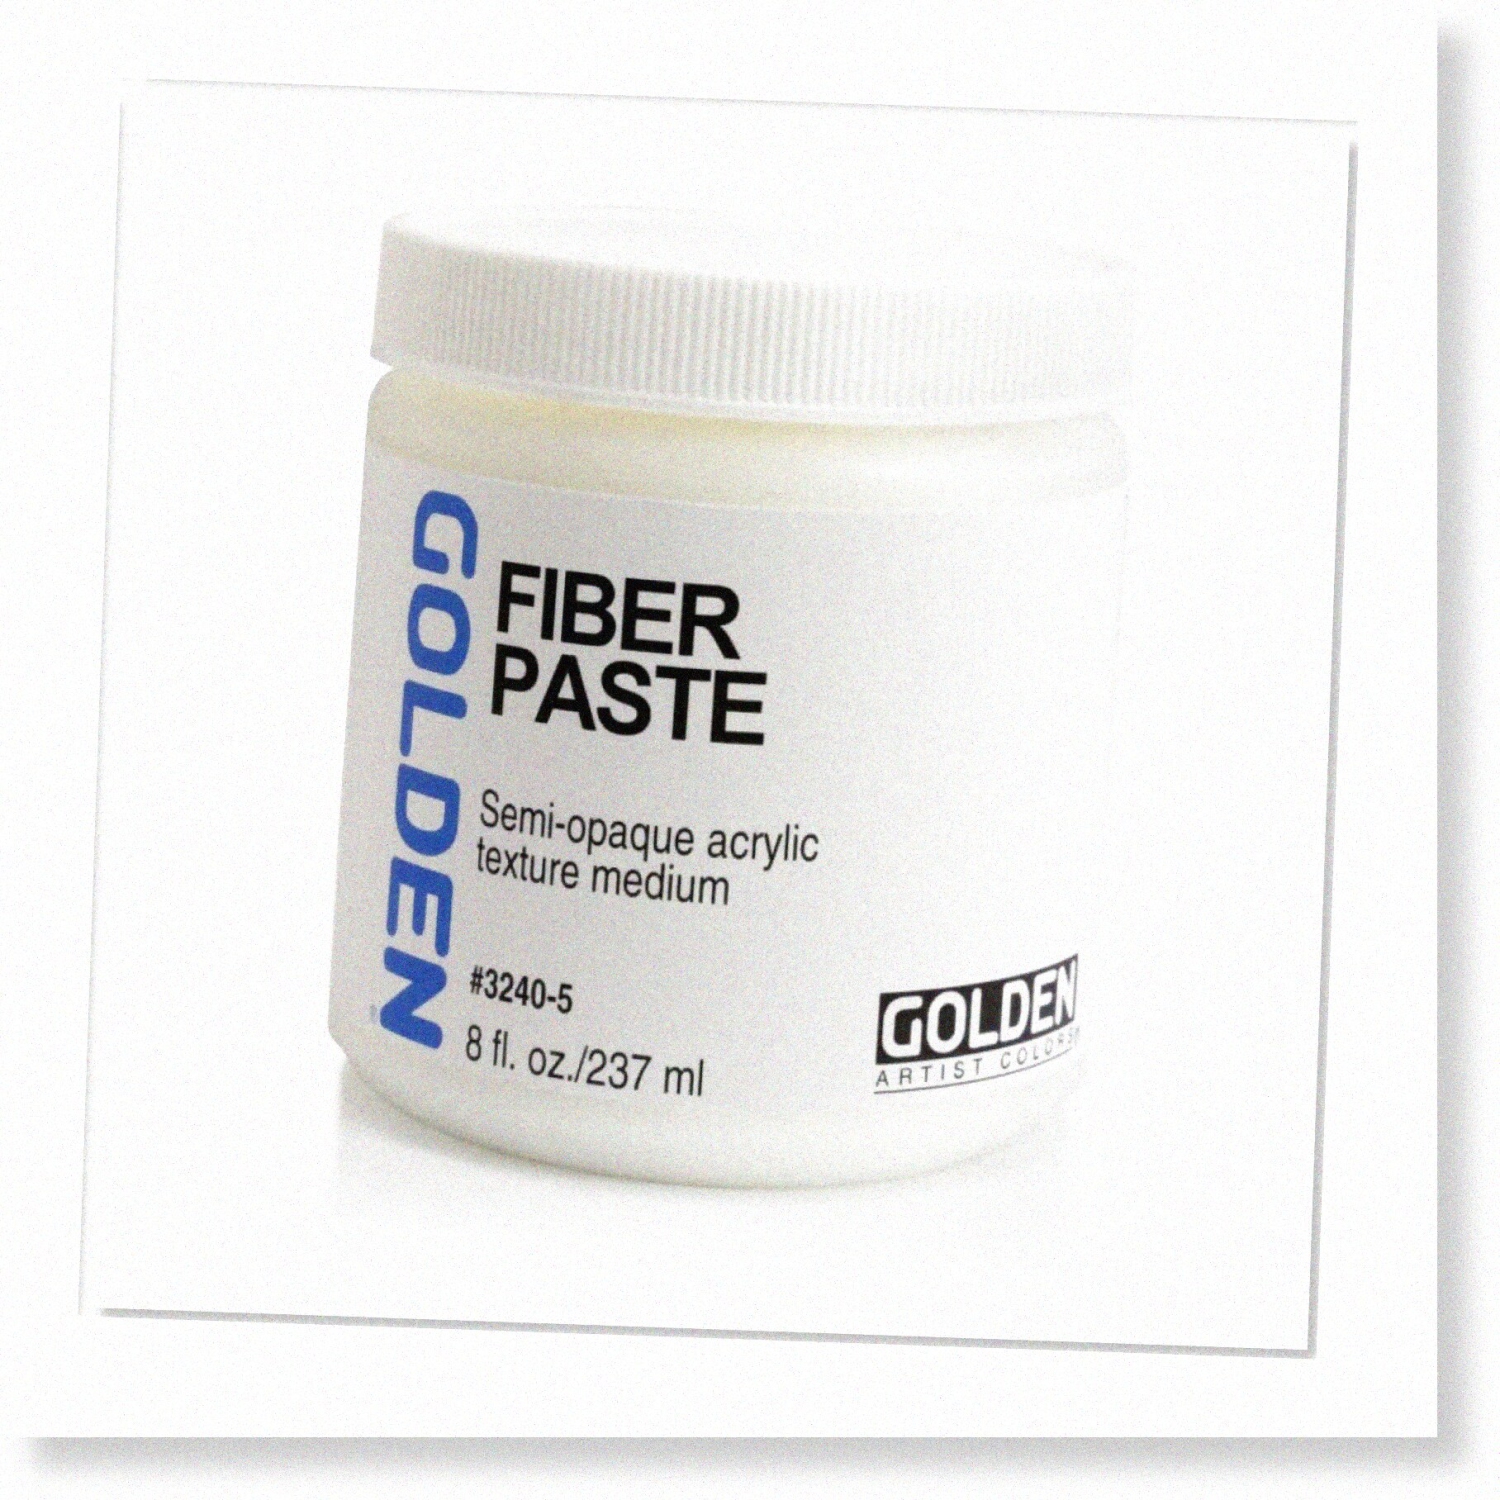 8oz Fiber Paste - Strong Hold Hair Styling Product for All Hair Types